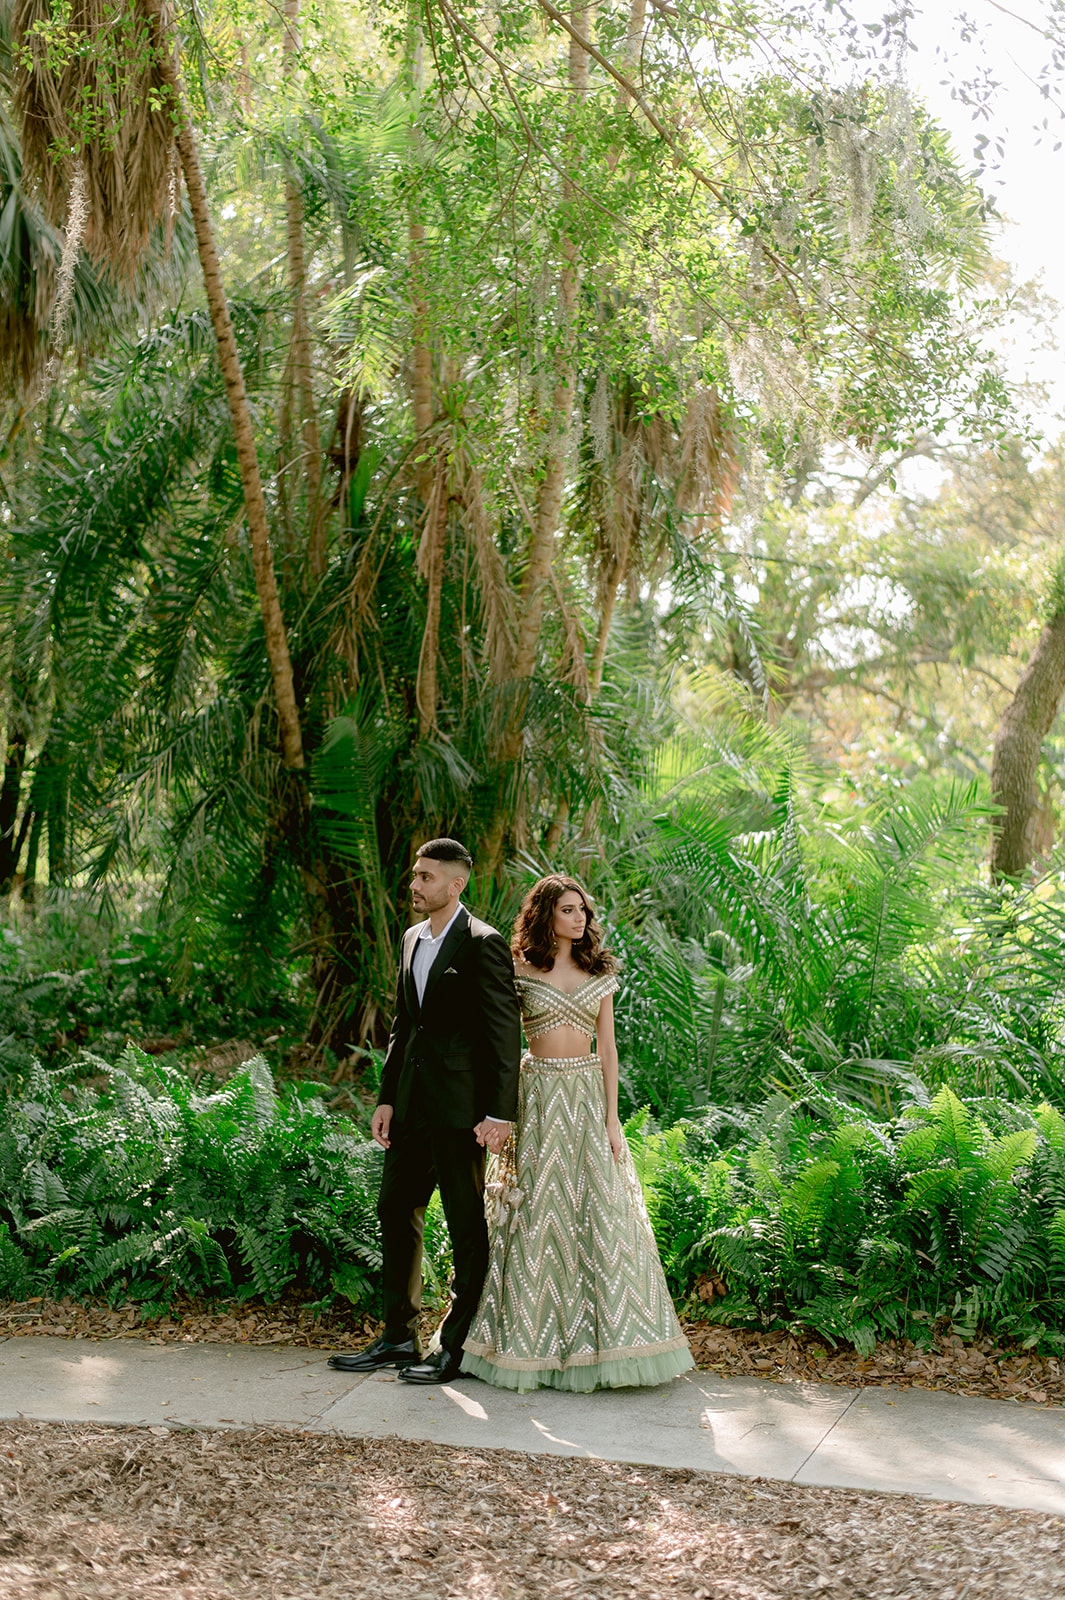 "Ringling Museum engagement shoot features pastel green and gold Indian outfit and stunning location"
